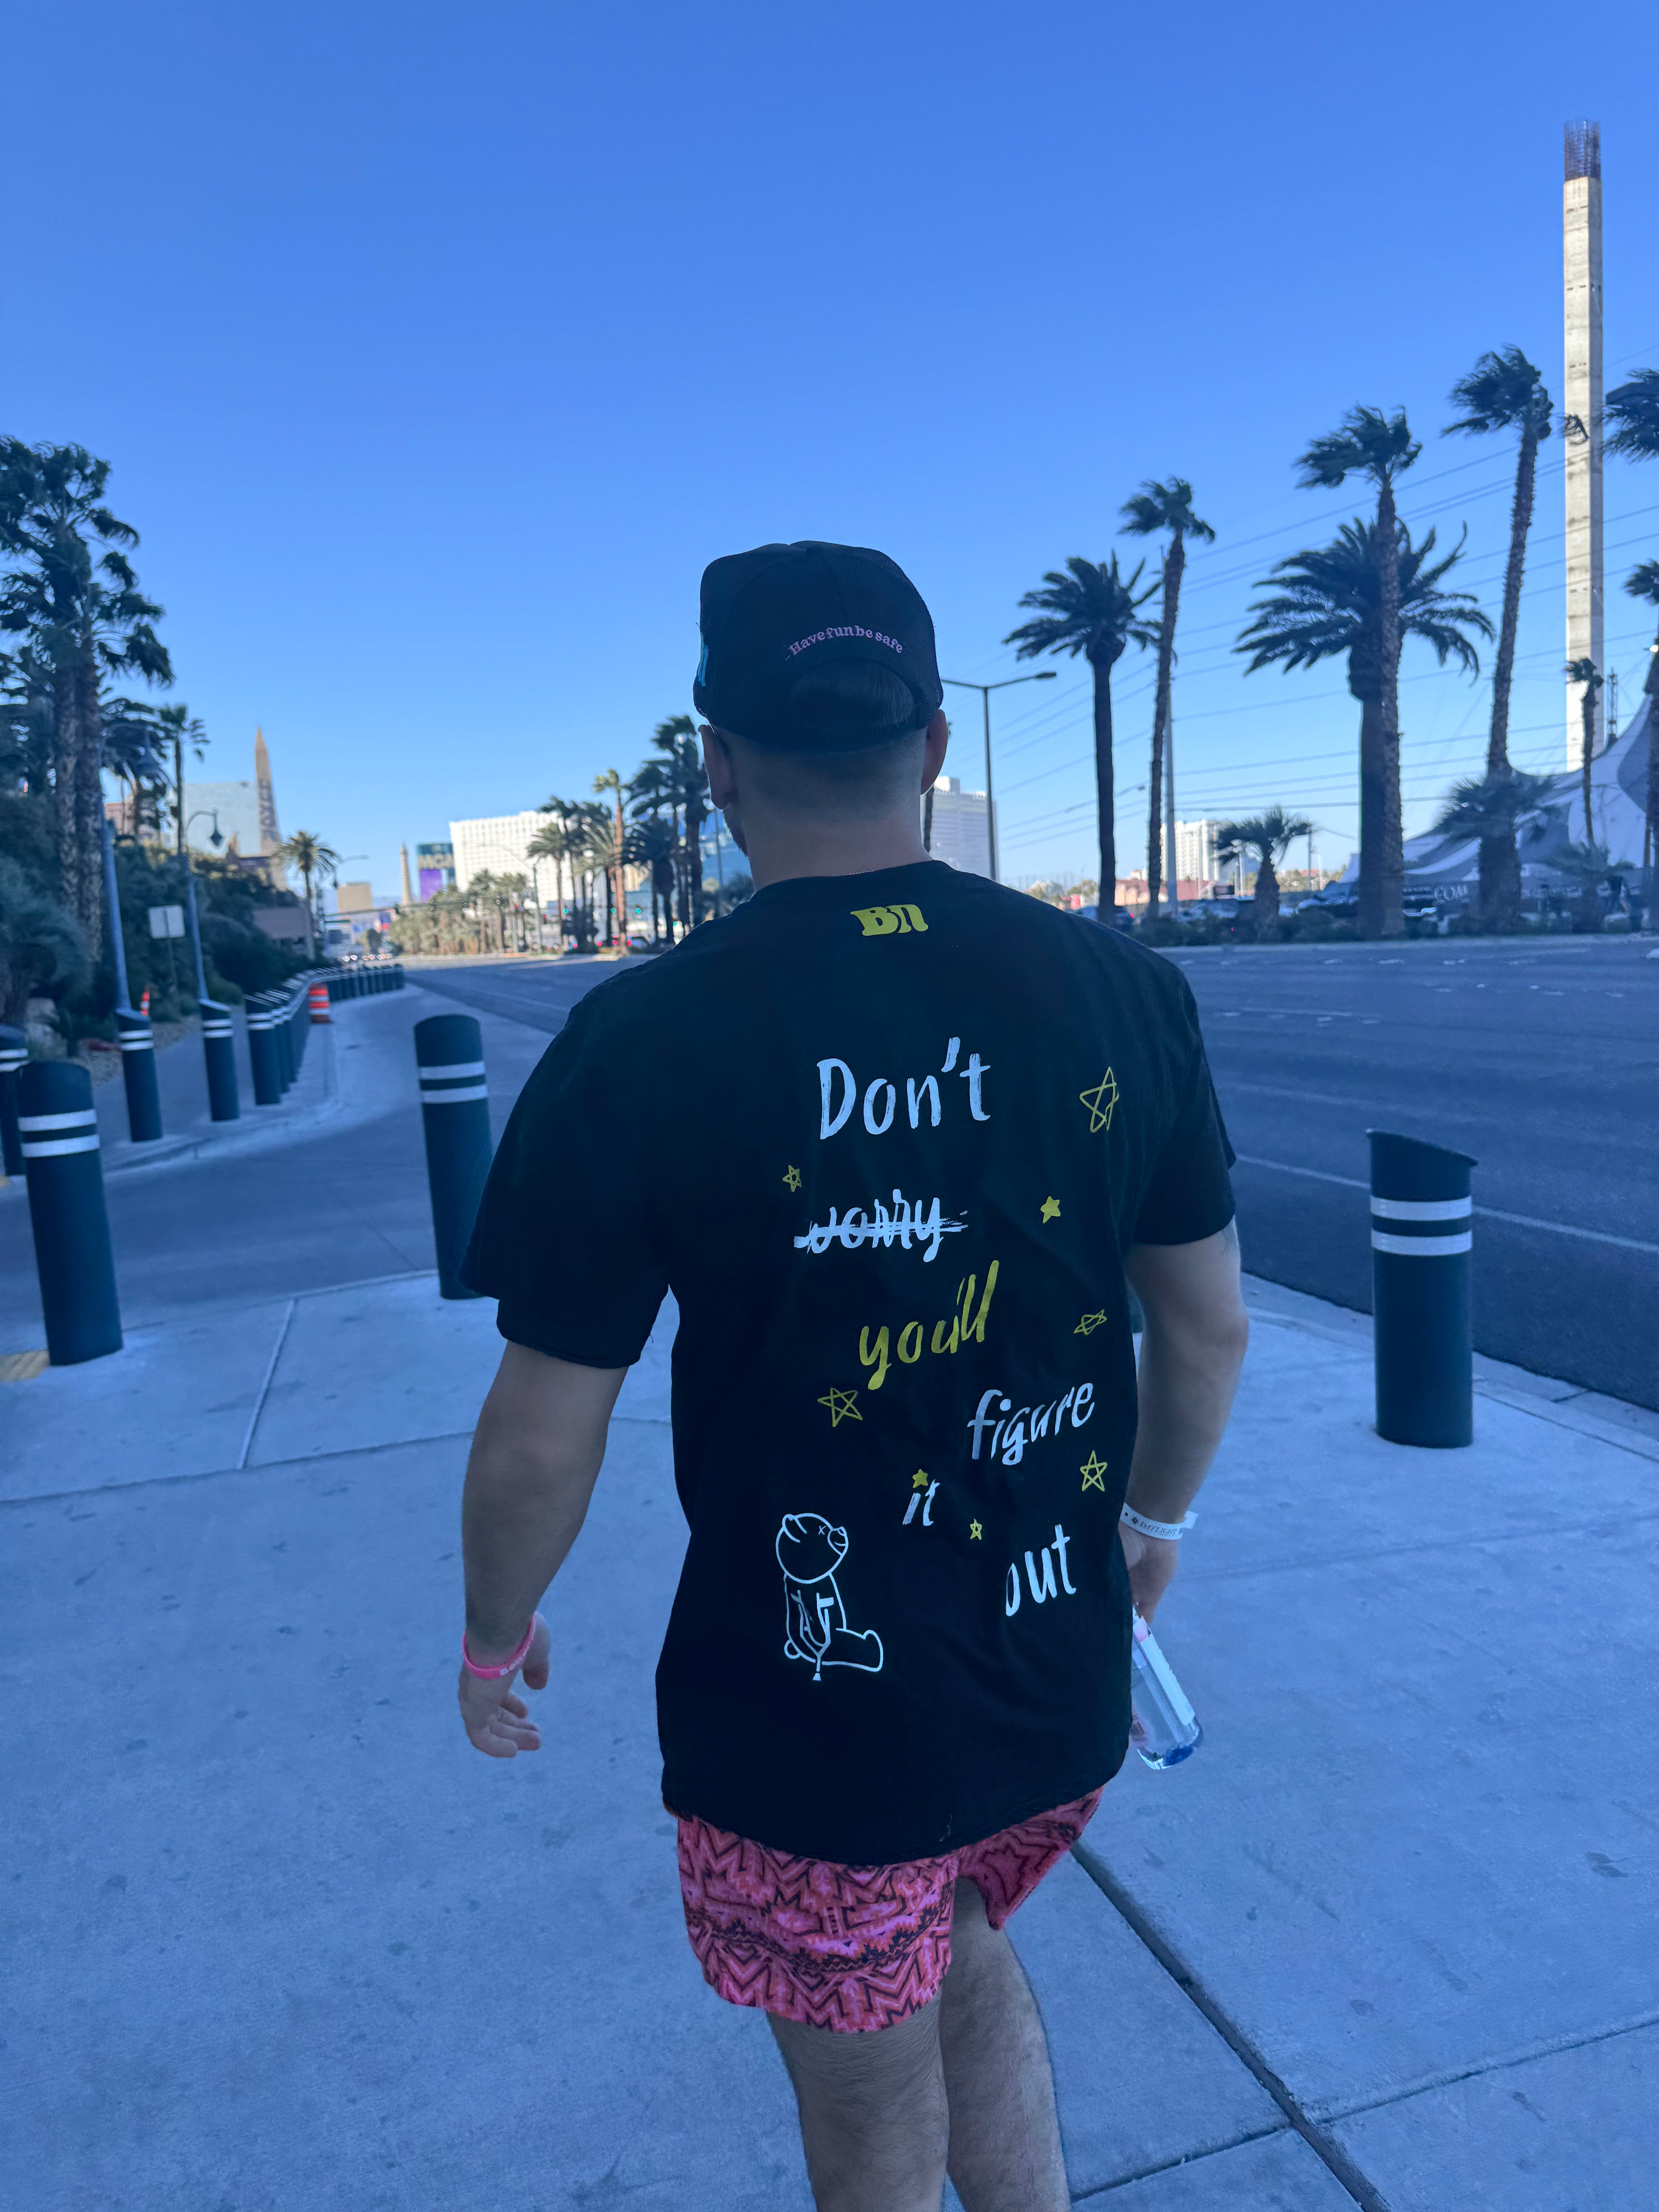 A person wearing a black hat and a black cotton Better not Don't Worry Tee with the text "Don't worry, you'll figure it out" walks down a street lined with palm trees.